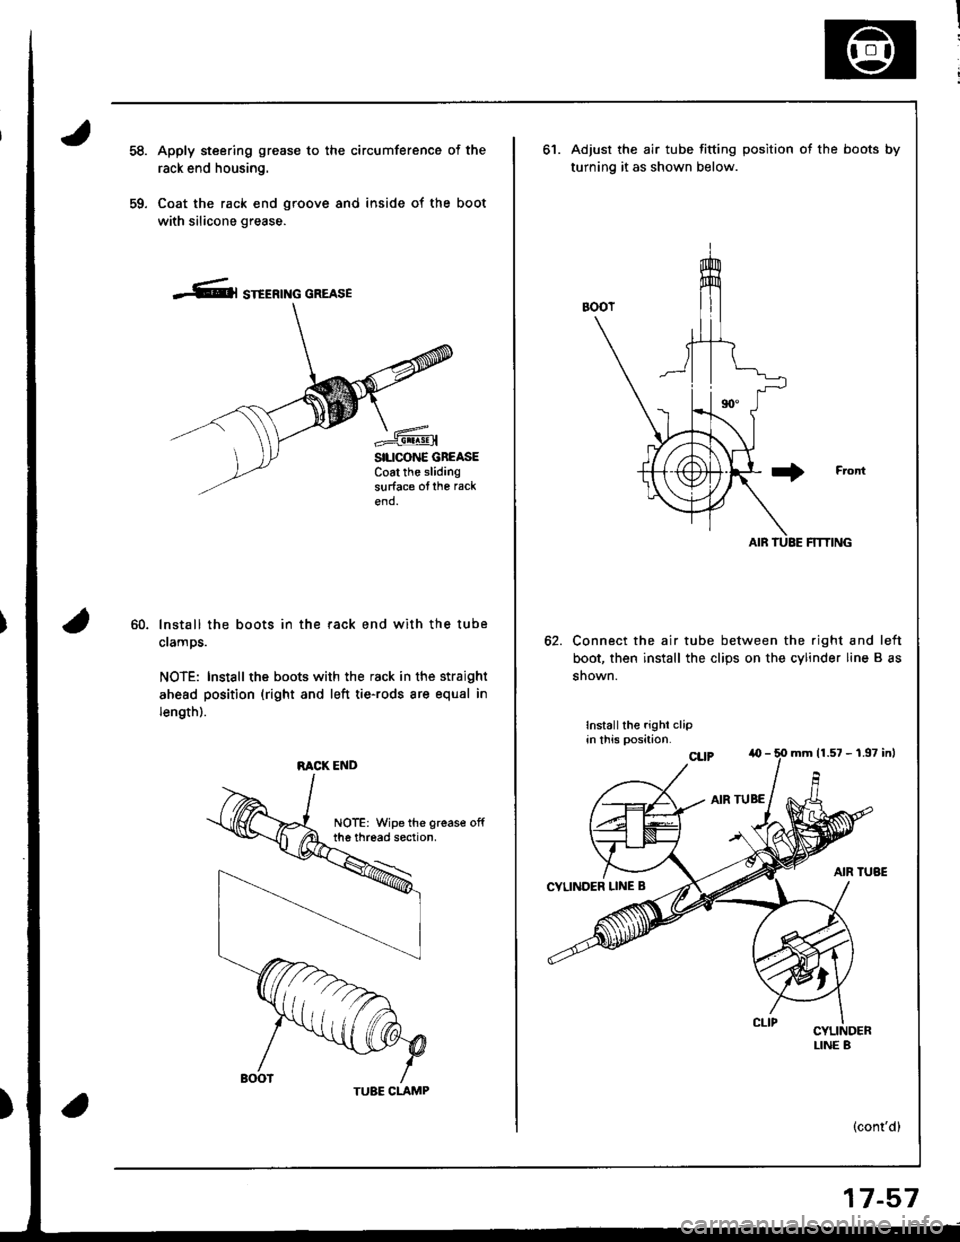 HONDA INTEGRA 1998 4.G Workshop Manual 59.
Apply steering grease to the circumference of the
rack end housing.
Coat the rack end groove and inside of the boot
with silicone grease.
-Cl STEERTNG GREASE
SILICONE GBEASECoat the slidingsurface